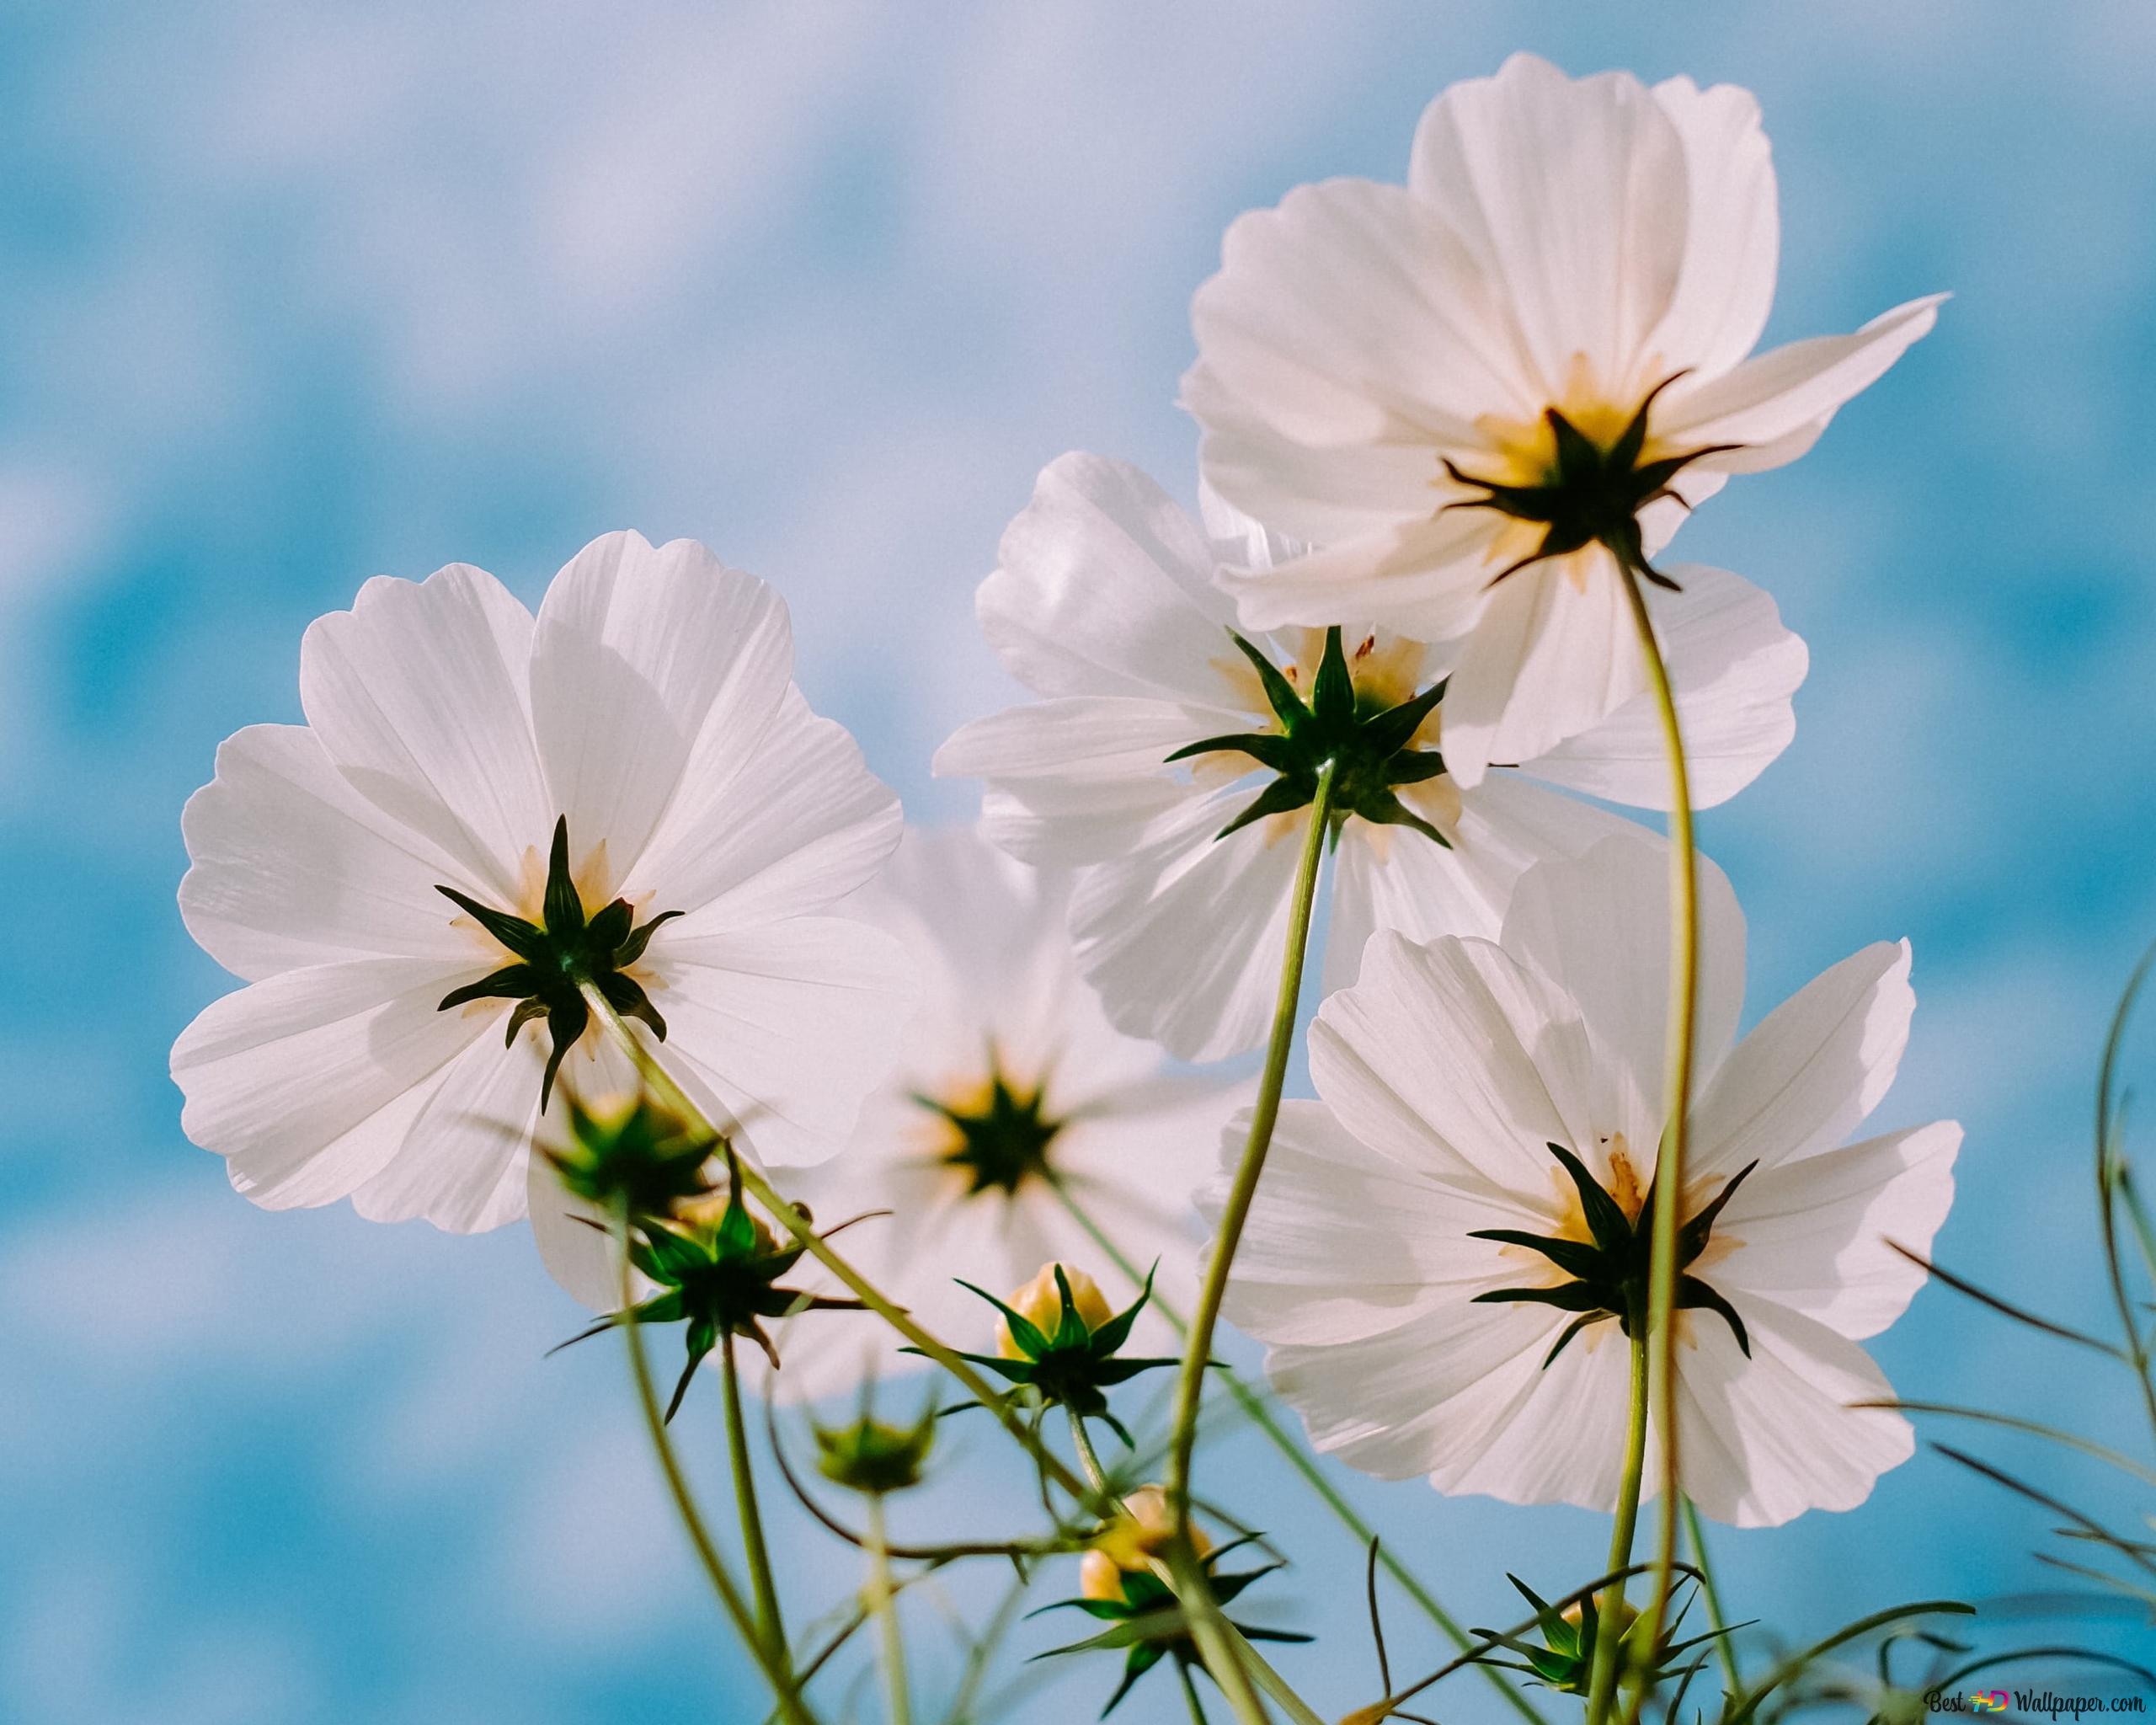 White flowers outdoors in spring 2K wallpaper download